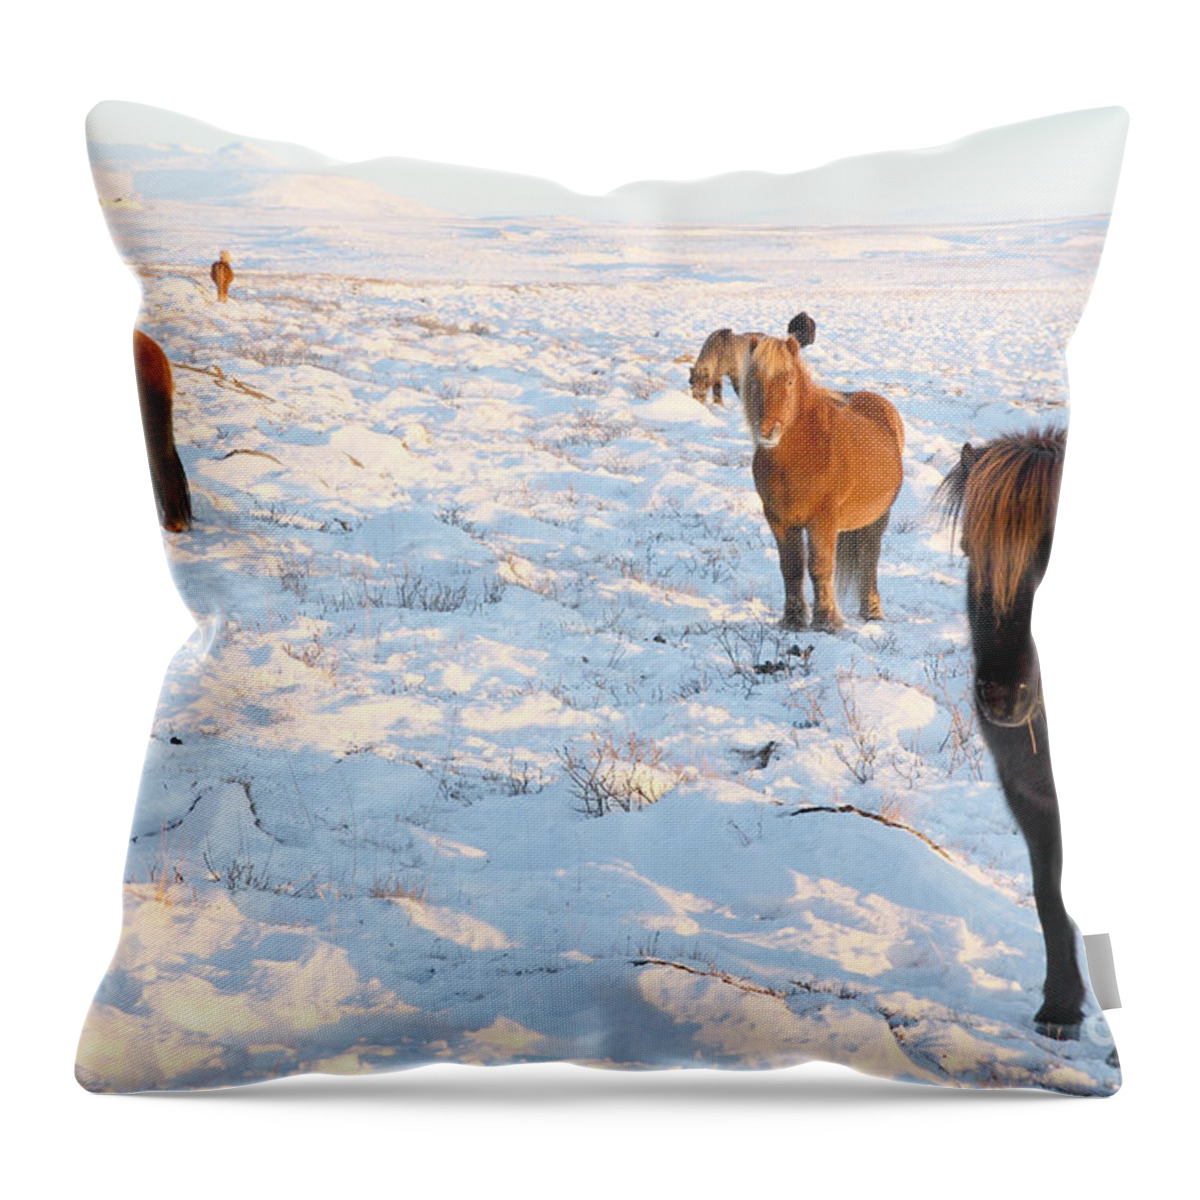 Iceland Throw Pillow featuring the photograph Iceland by Milena Boeva